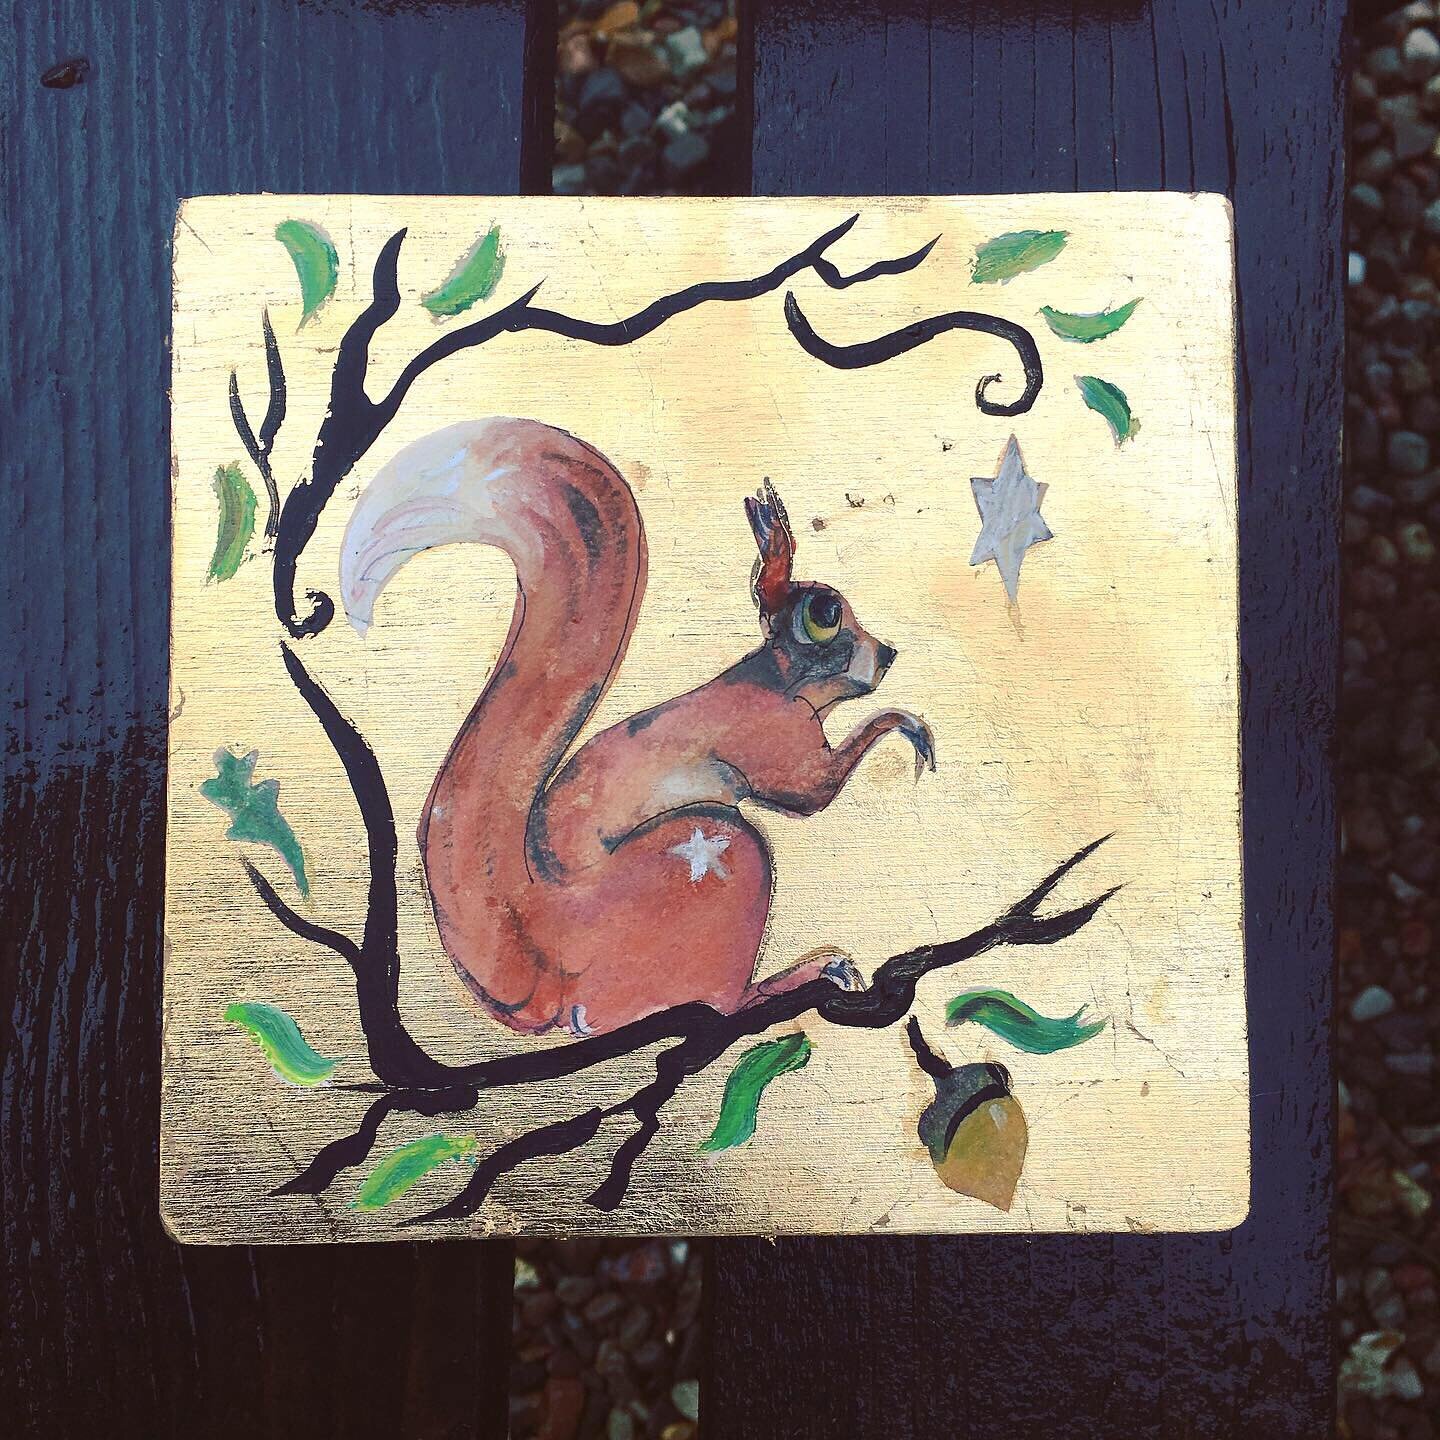 Red squirrel
Wishing on a Star
Little gilded treasure 
&pound;80 

#wishingonastar #red #redsquirrel #paintings #loveart #redheads #goldleafart #goldleafart #redvelvet #acorn #artforyourhome #whimsical #paintingsforsale #gold #gilded #

 #🐿 #squirre